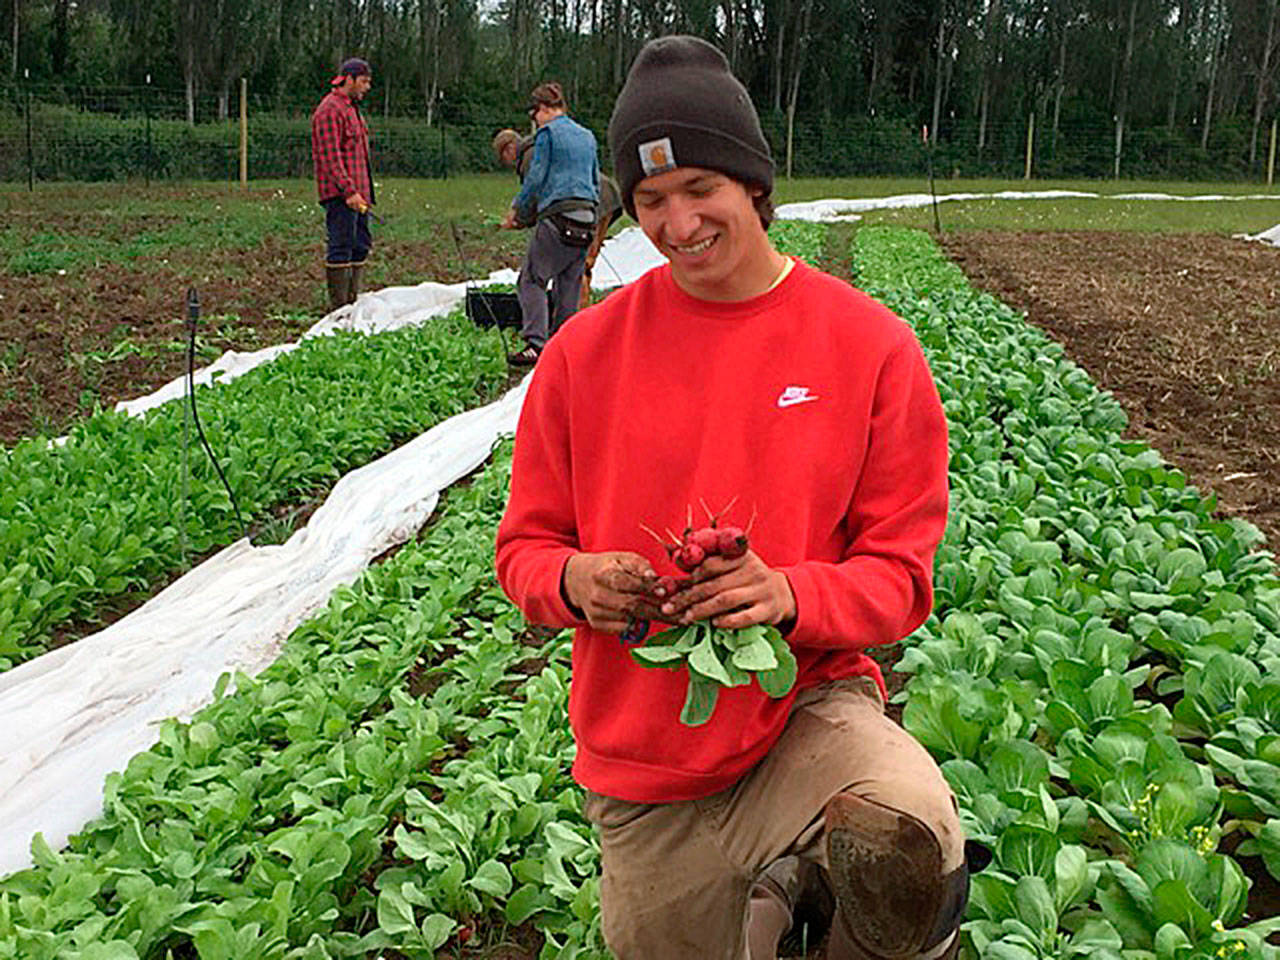 Contributed photo — Student Peyton Cypress harvests radishes from the early spring. Cypress plans to take what he learned at Organic Farm School to the Midwest, where he grew up.